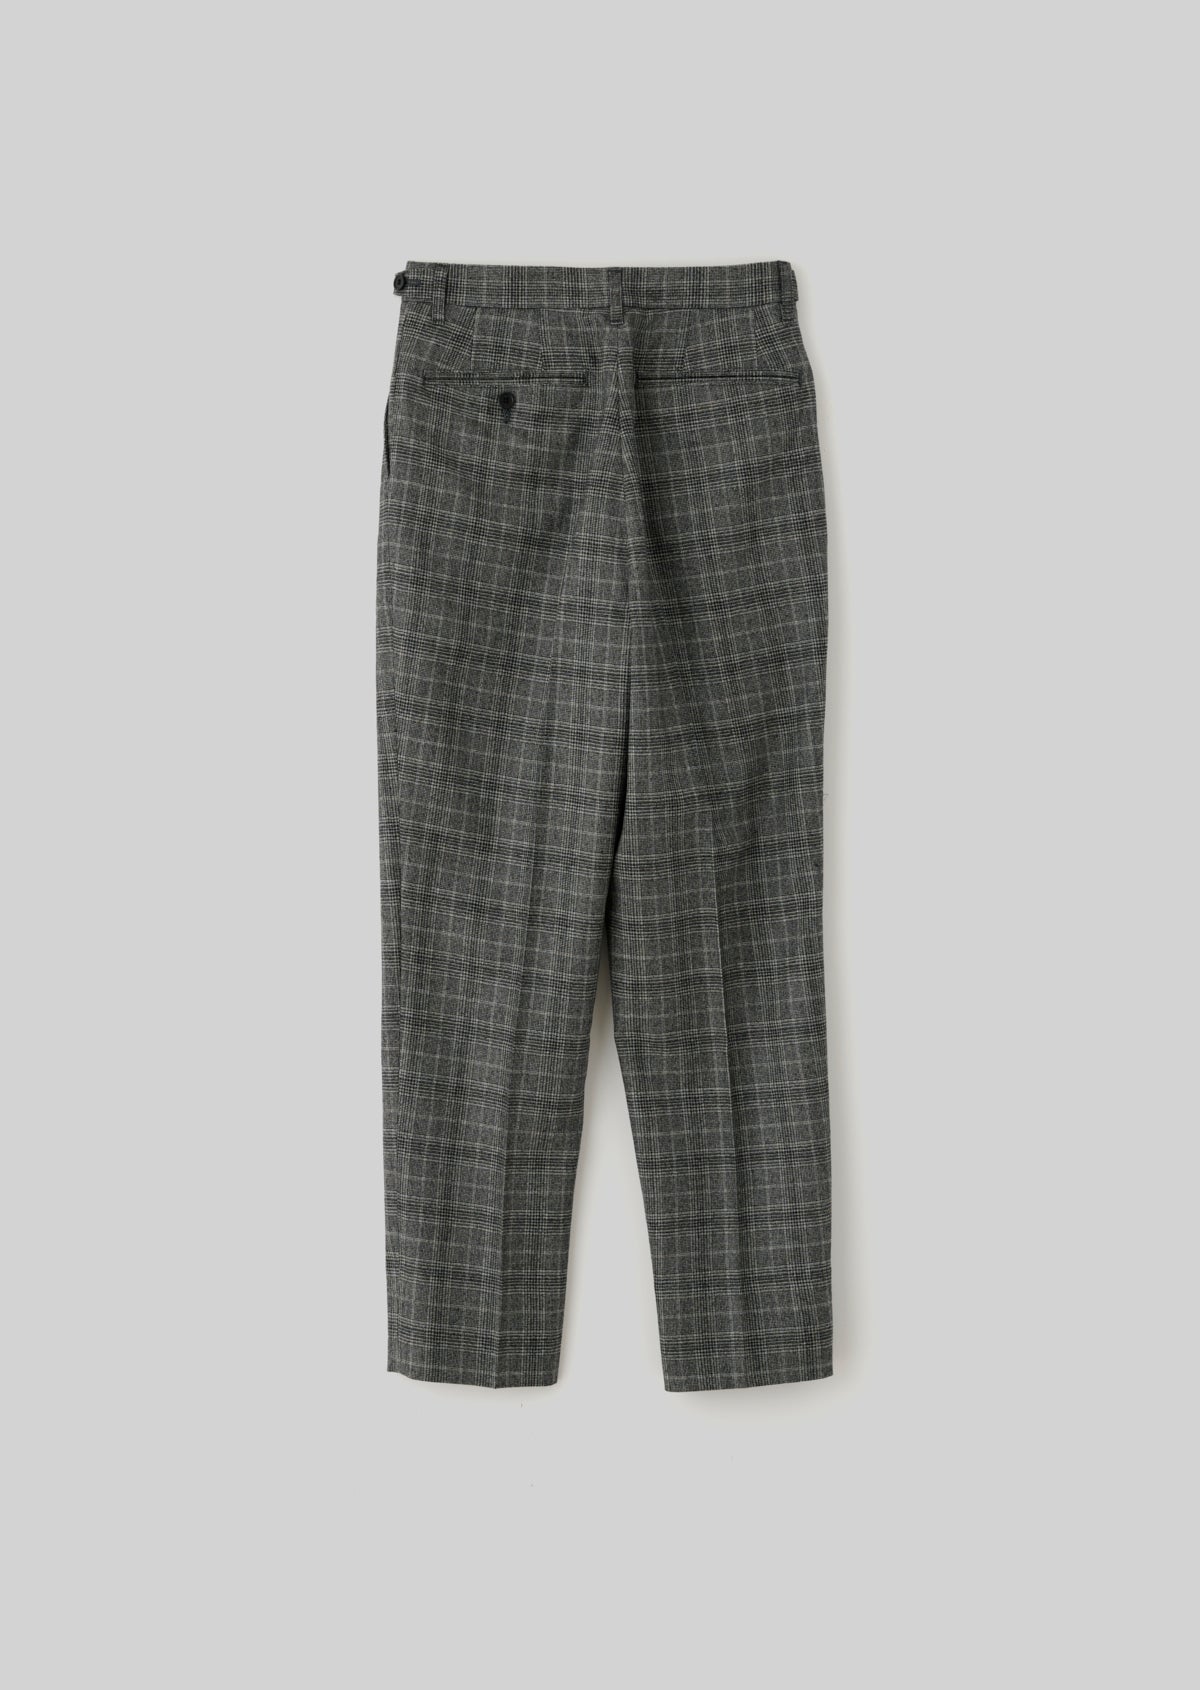 STRETCH FLANNEL TROUSERS GRAY 8233-1403